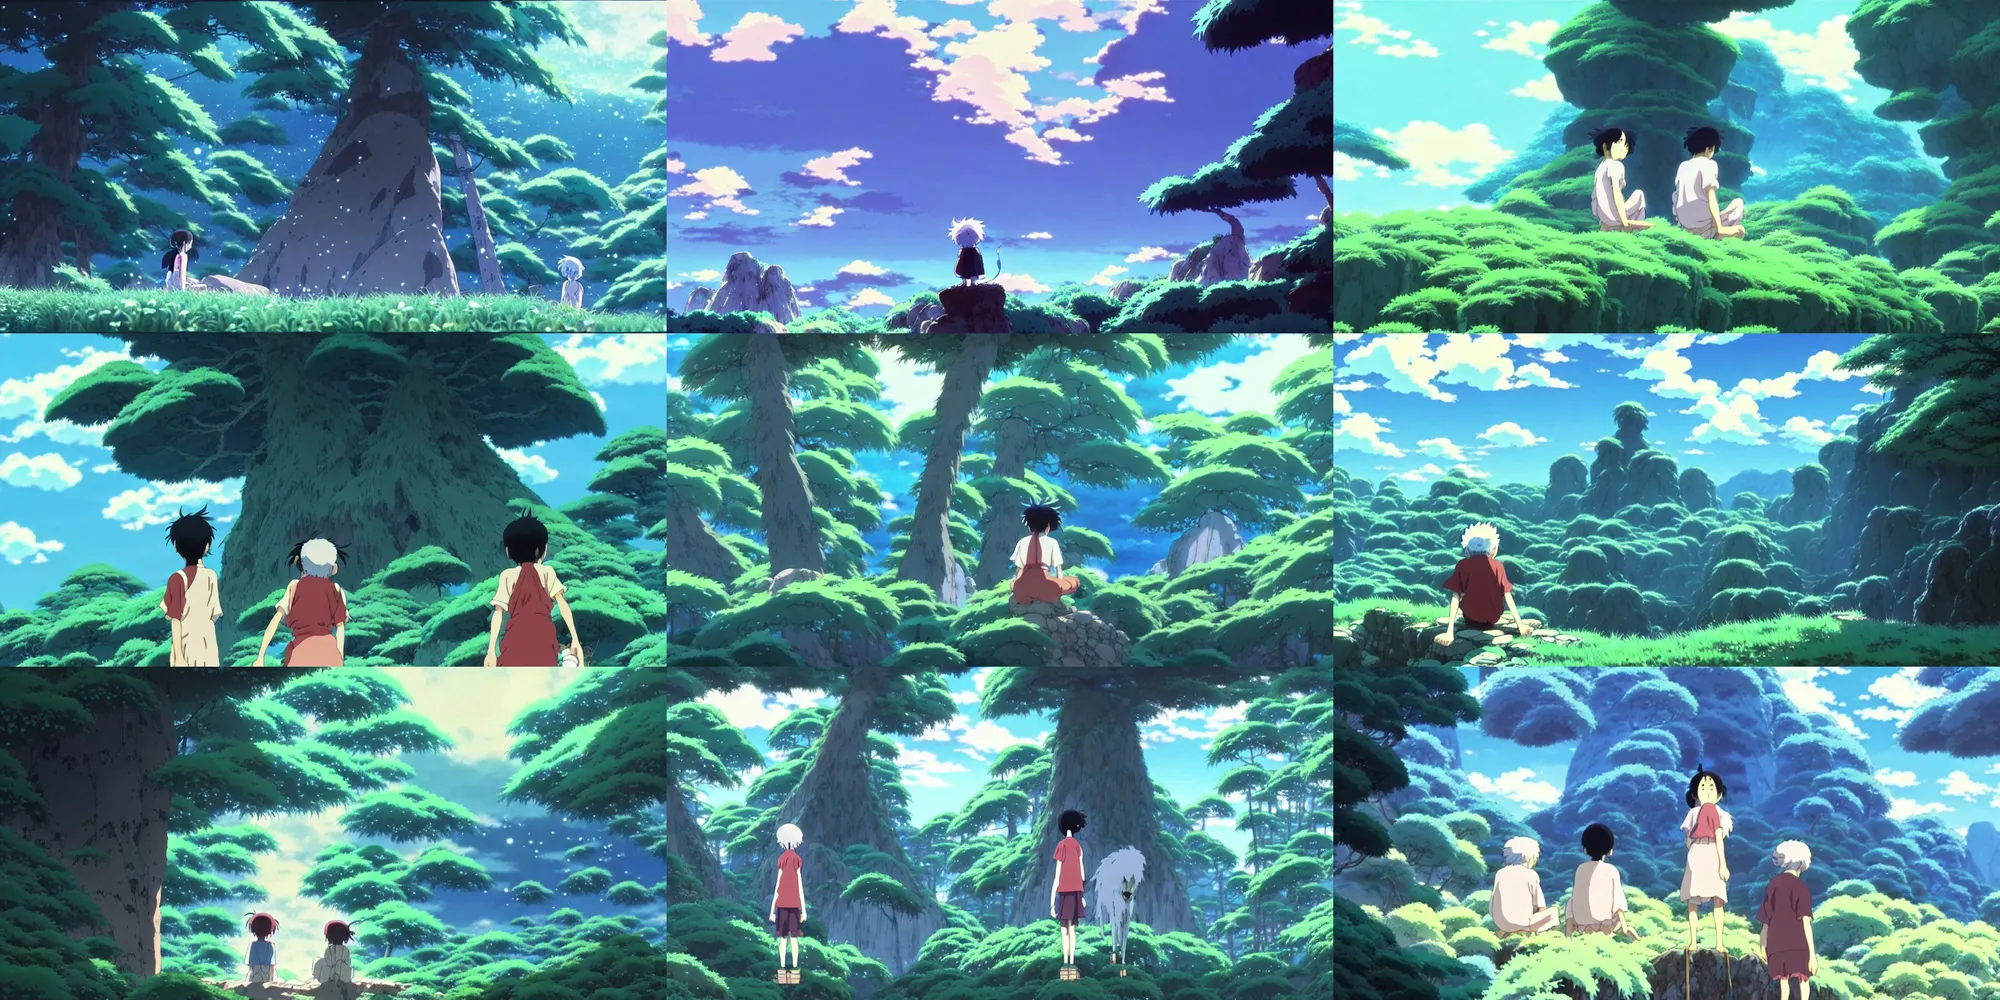 Prompt: a storybook illustration by Studio Ghibli, magical realism, an anime grandpa on an action adventure the otherworldly spirit world, painting by kazuo oga in the anime film, screenshot from the anime film Princess Mononoke by Makoto Shinkai